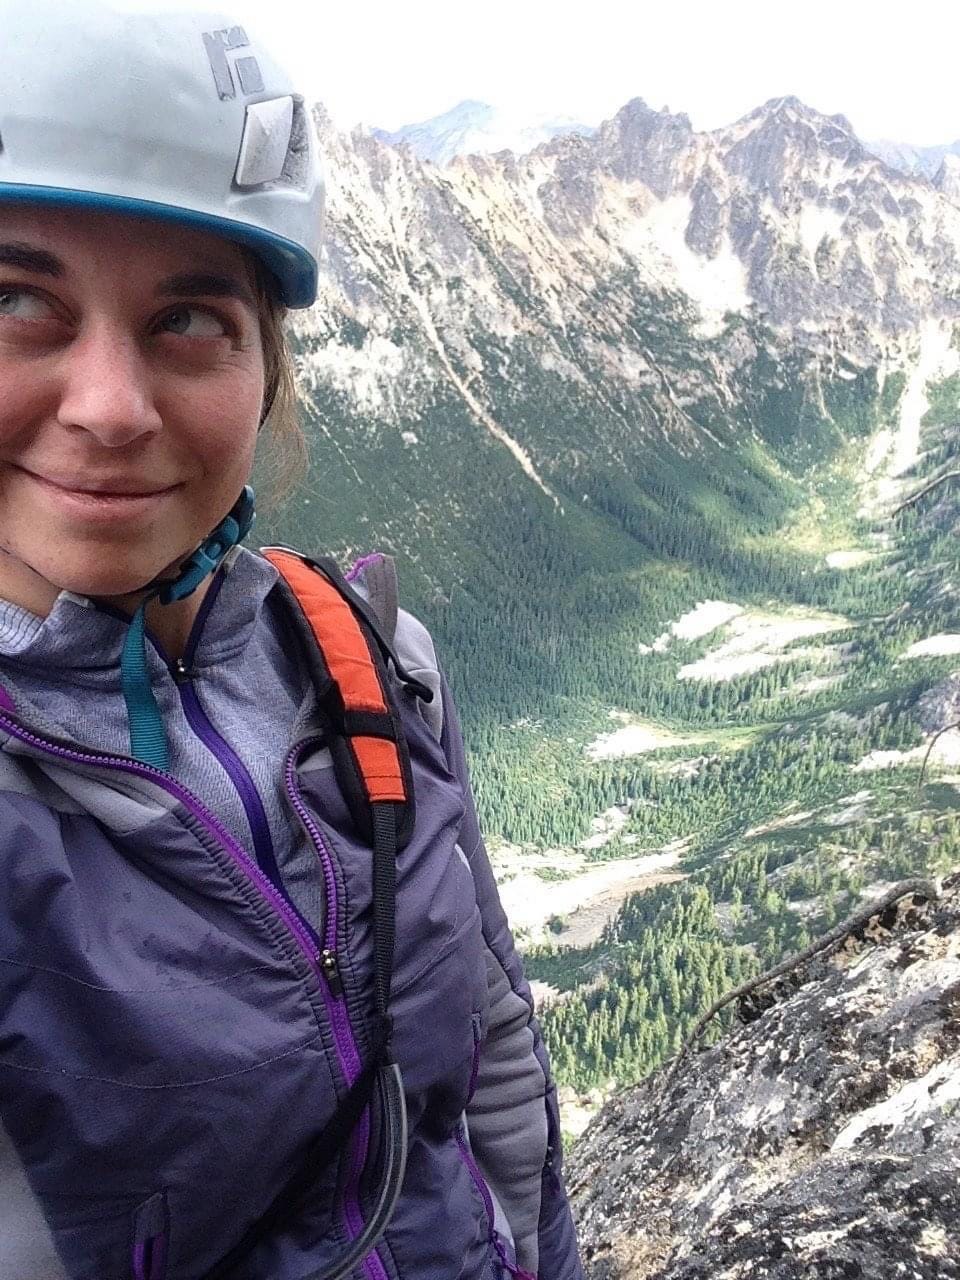 Erin Monahan's Feminist Response to the Outdoor Industry